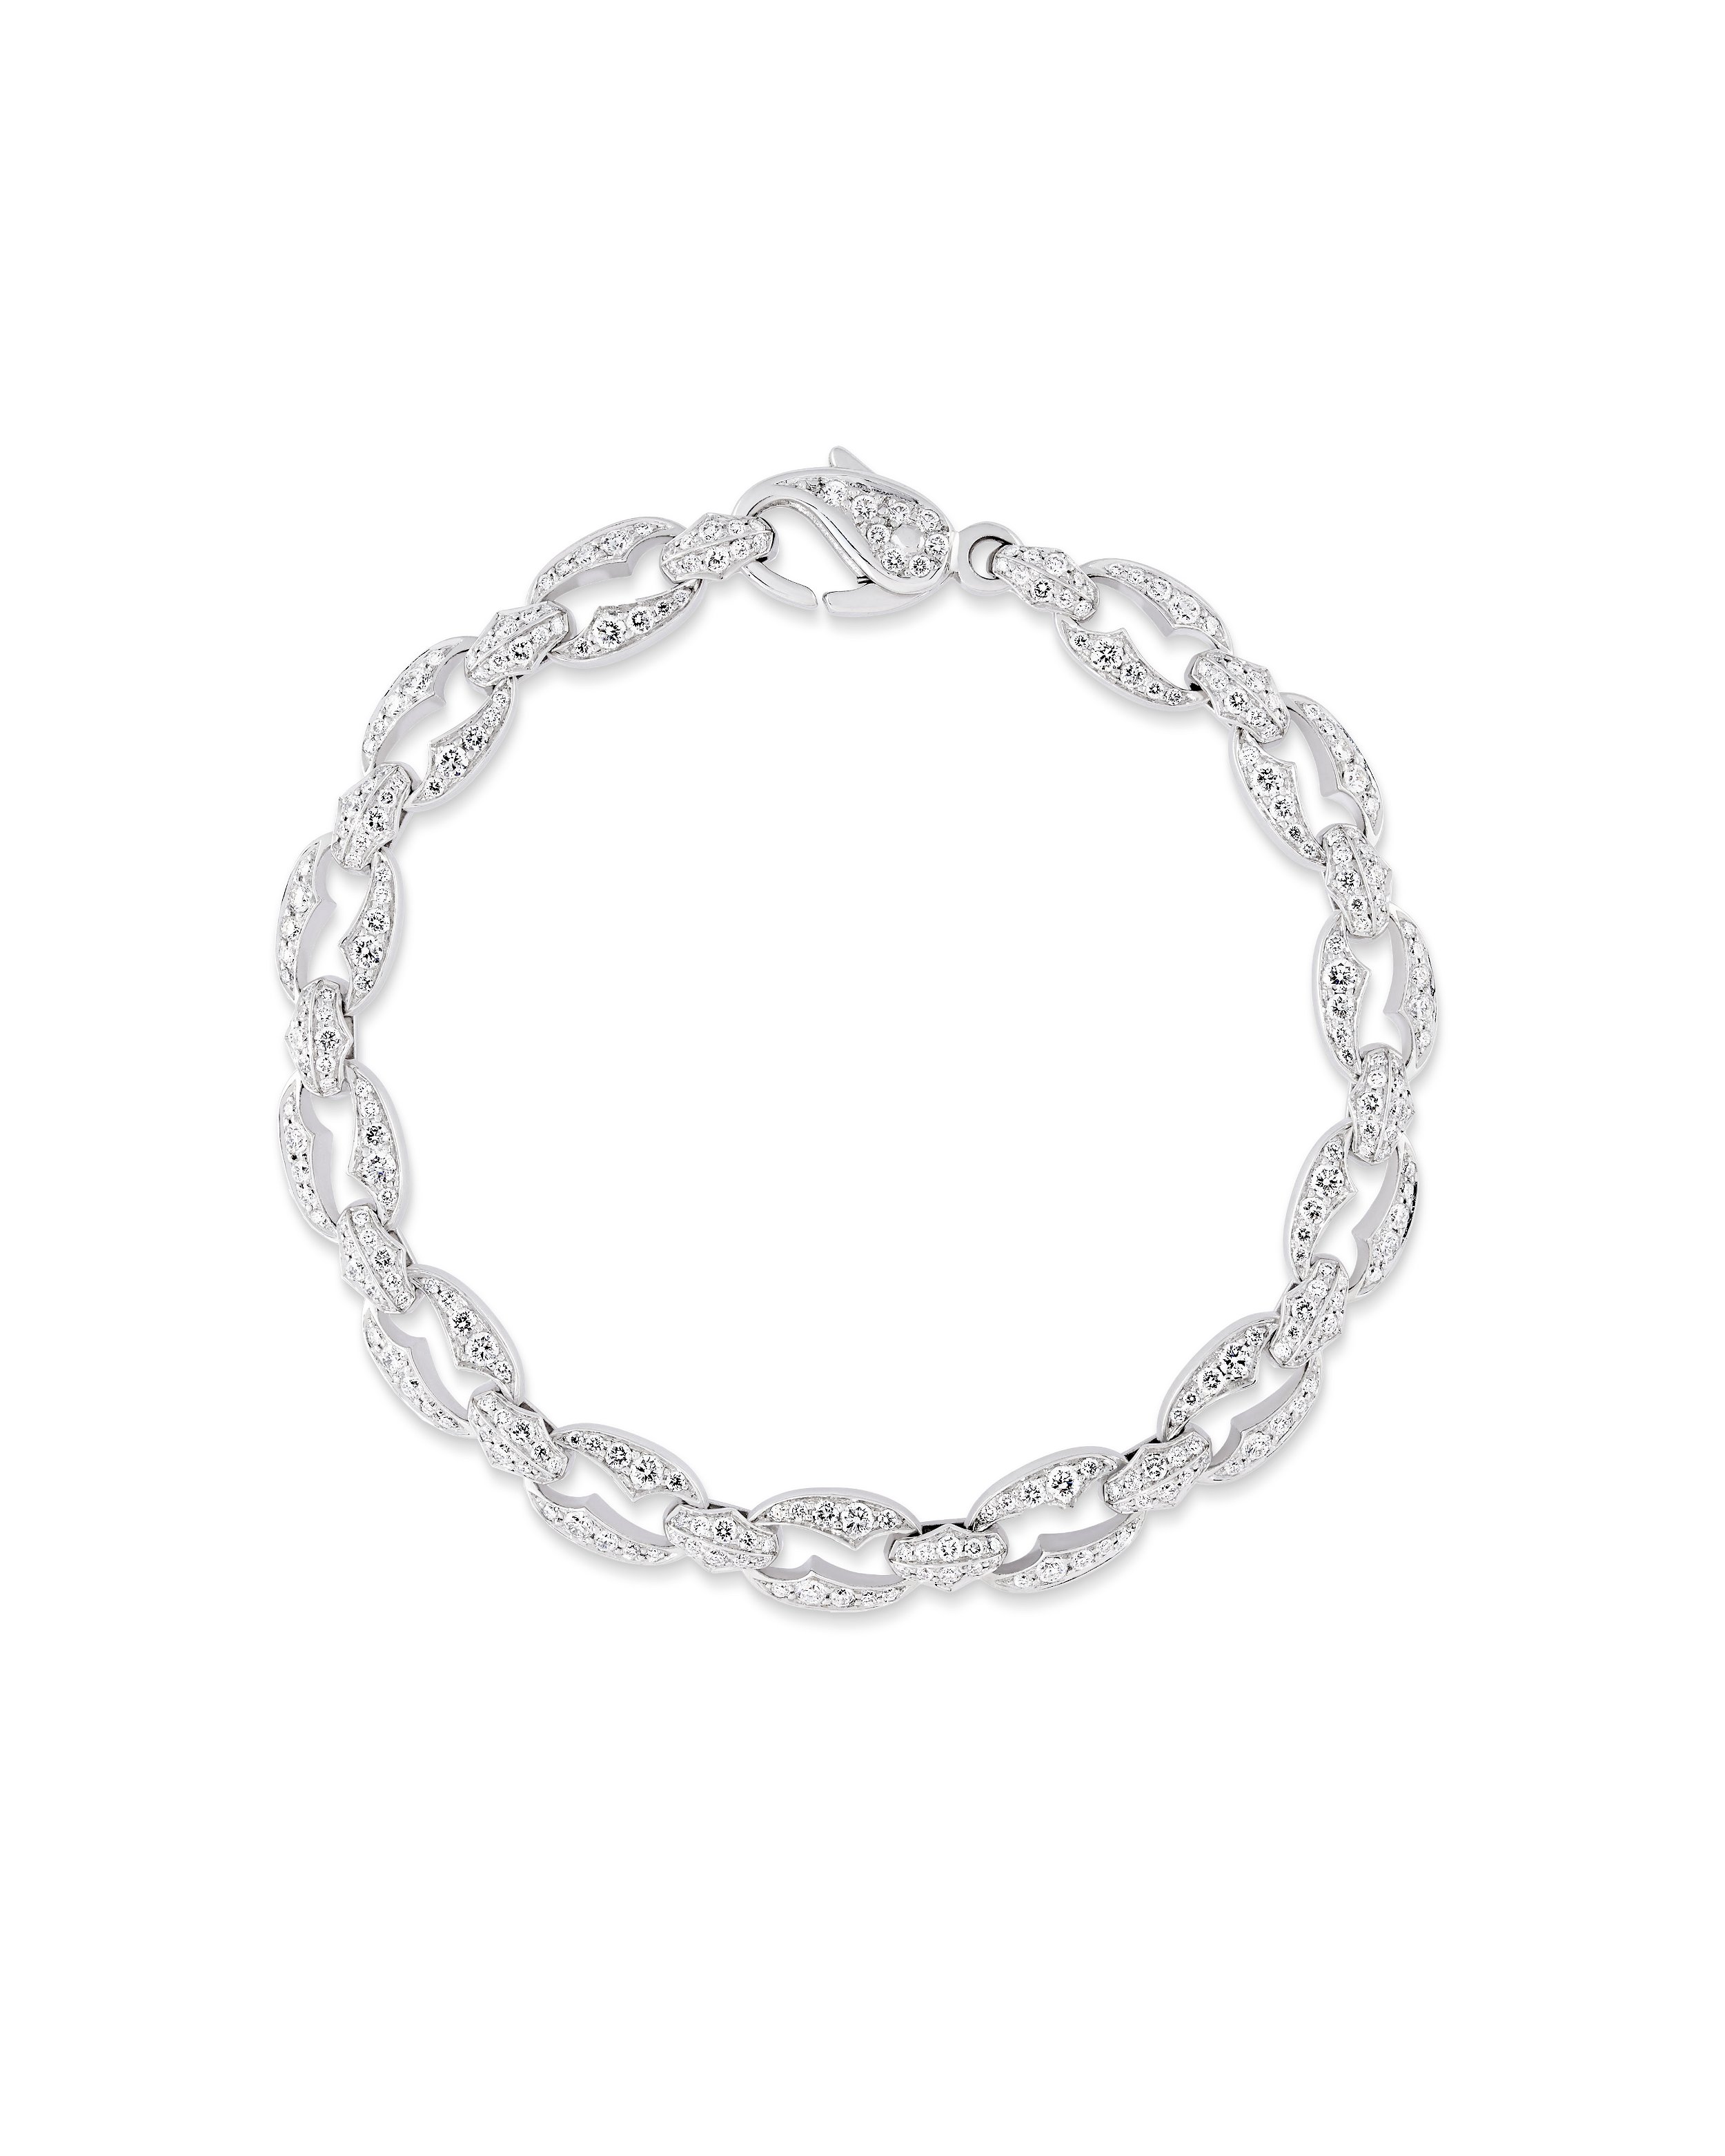 Thorn Embrace Chain Link Bracelet with White Diamonds in 18kt White Gold